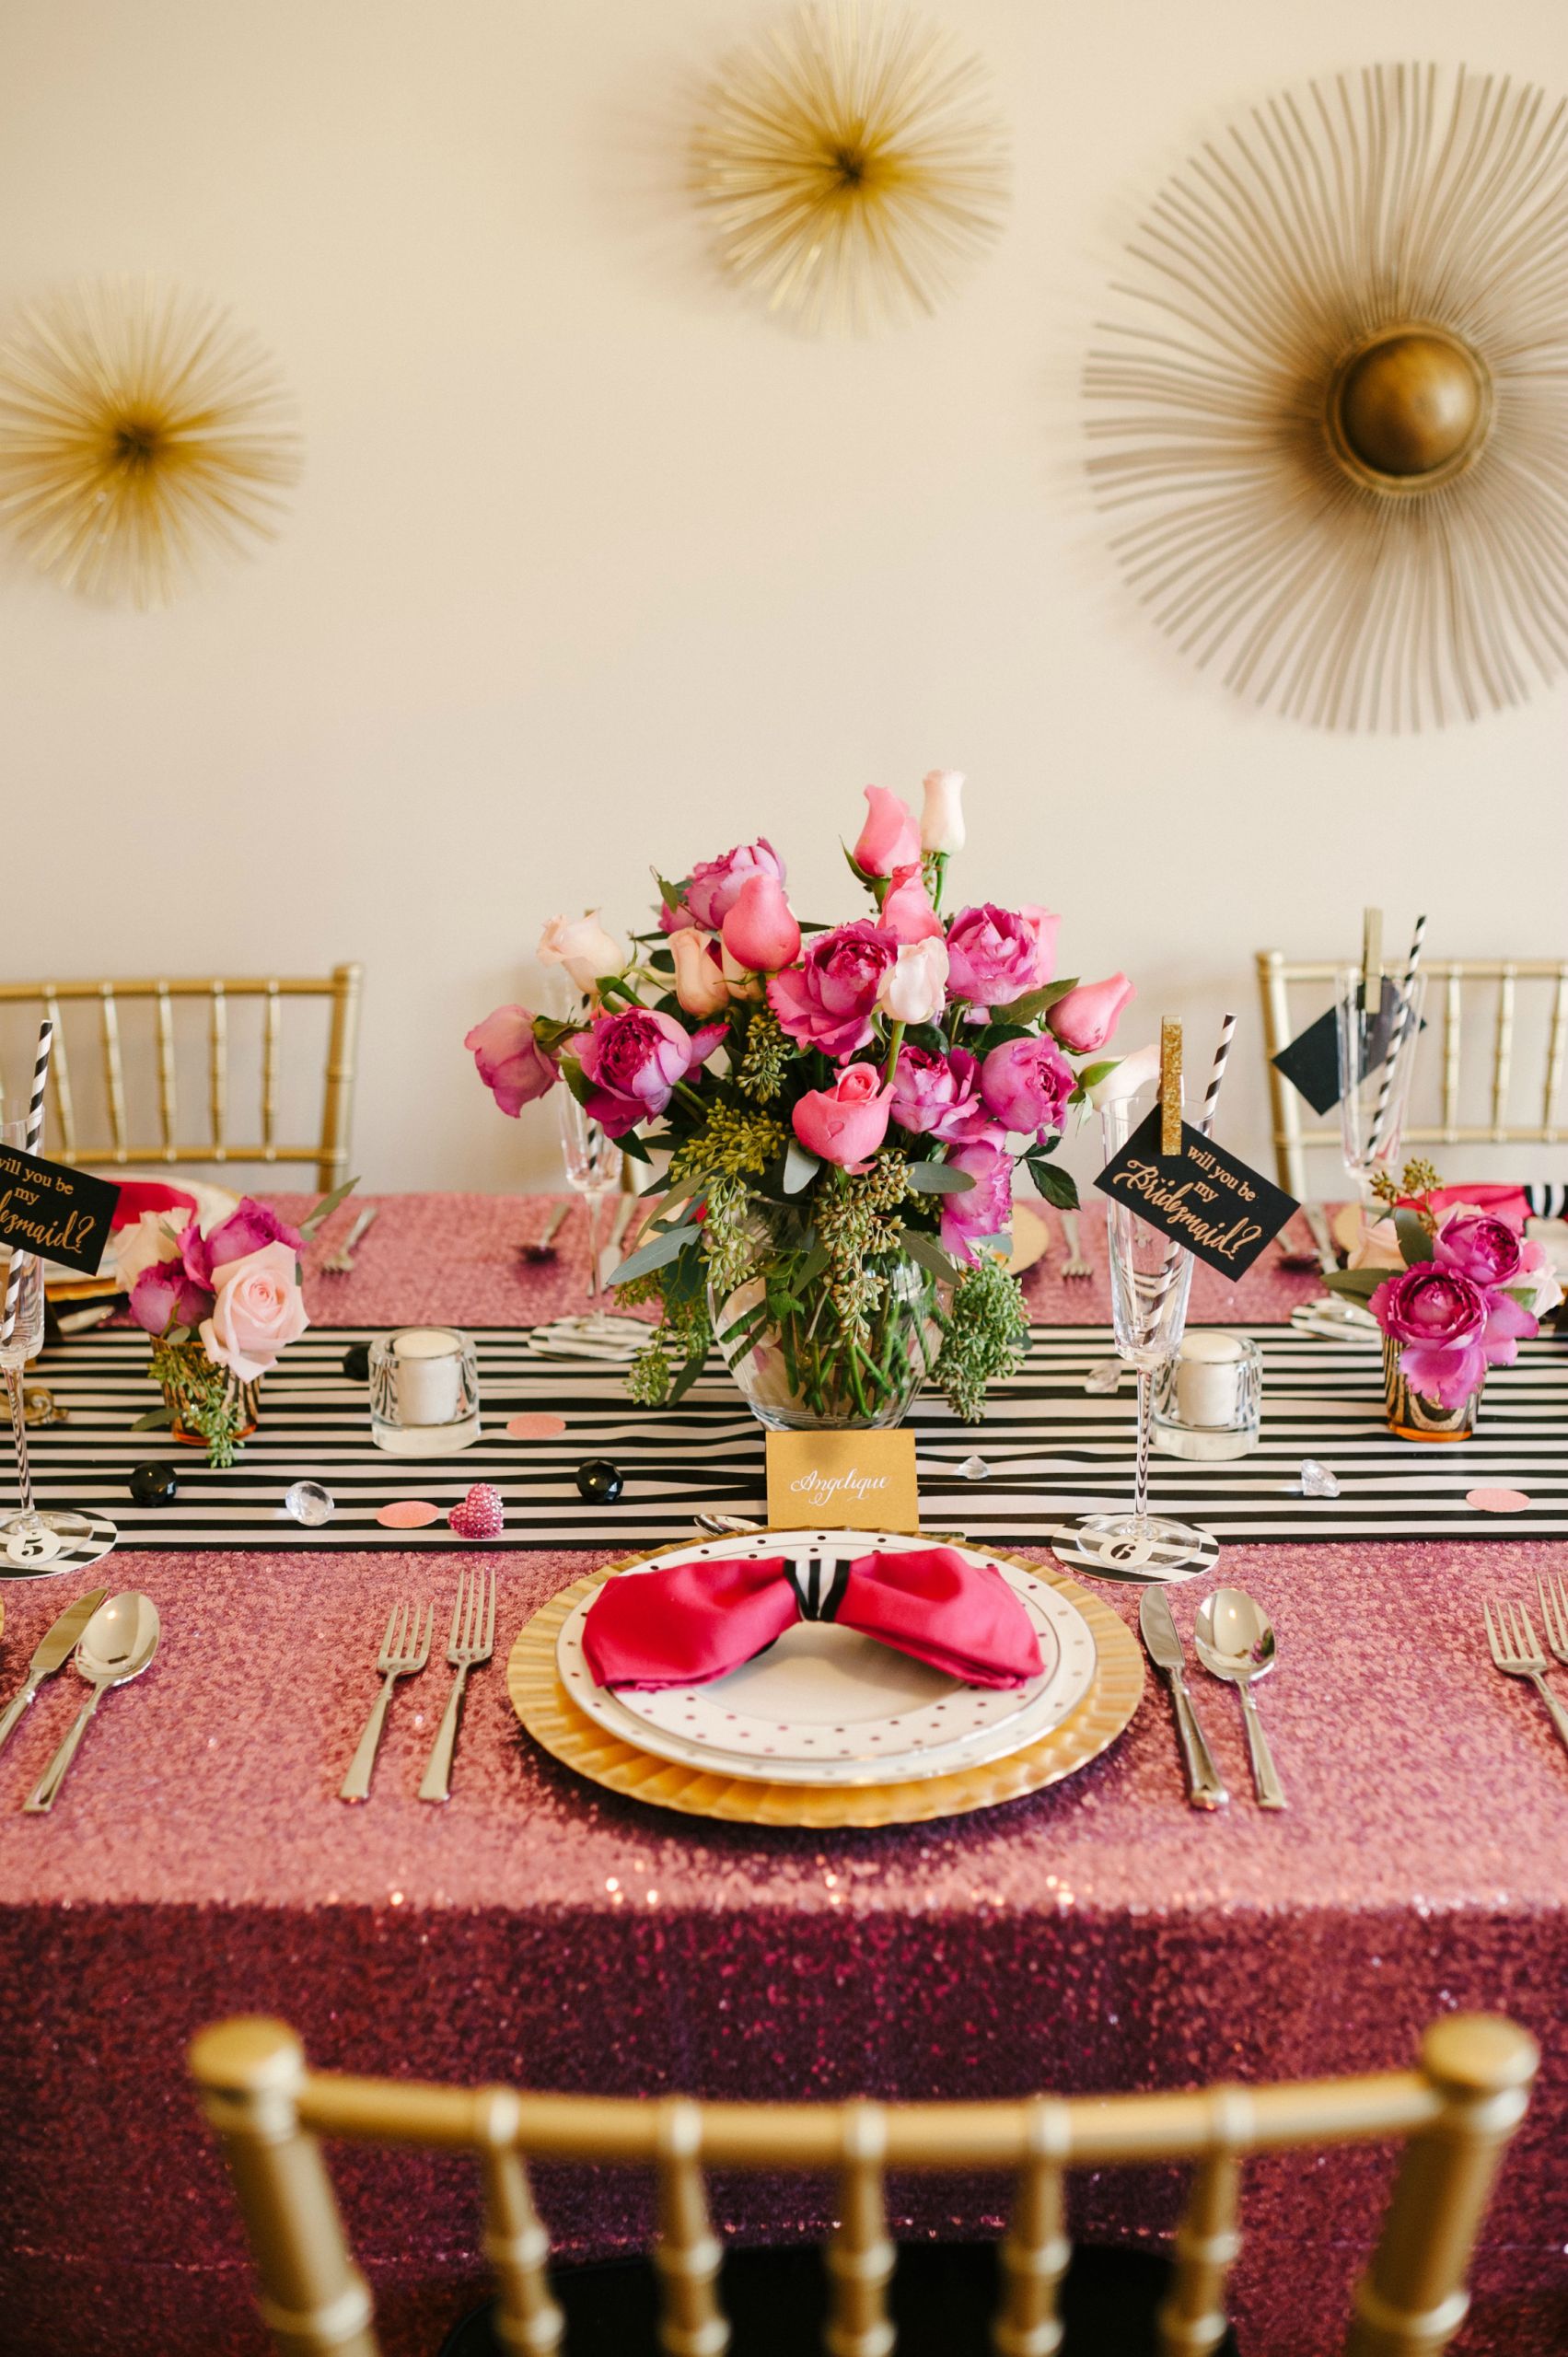 Wedding Shower Ideas And Themes
 Create A Memorable Bridal Shower With These 50 Different